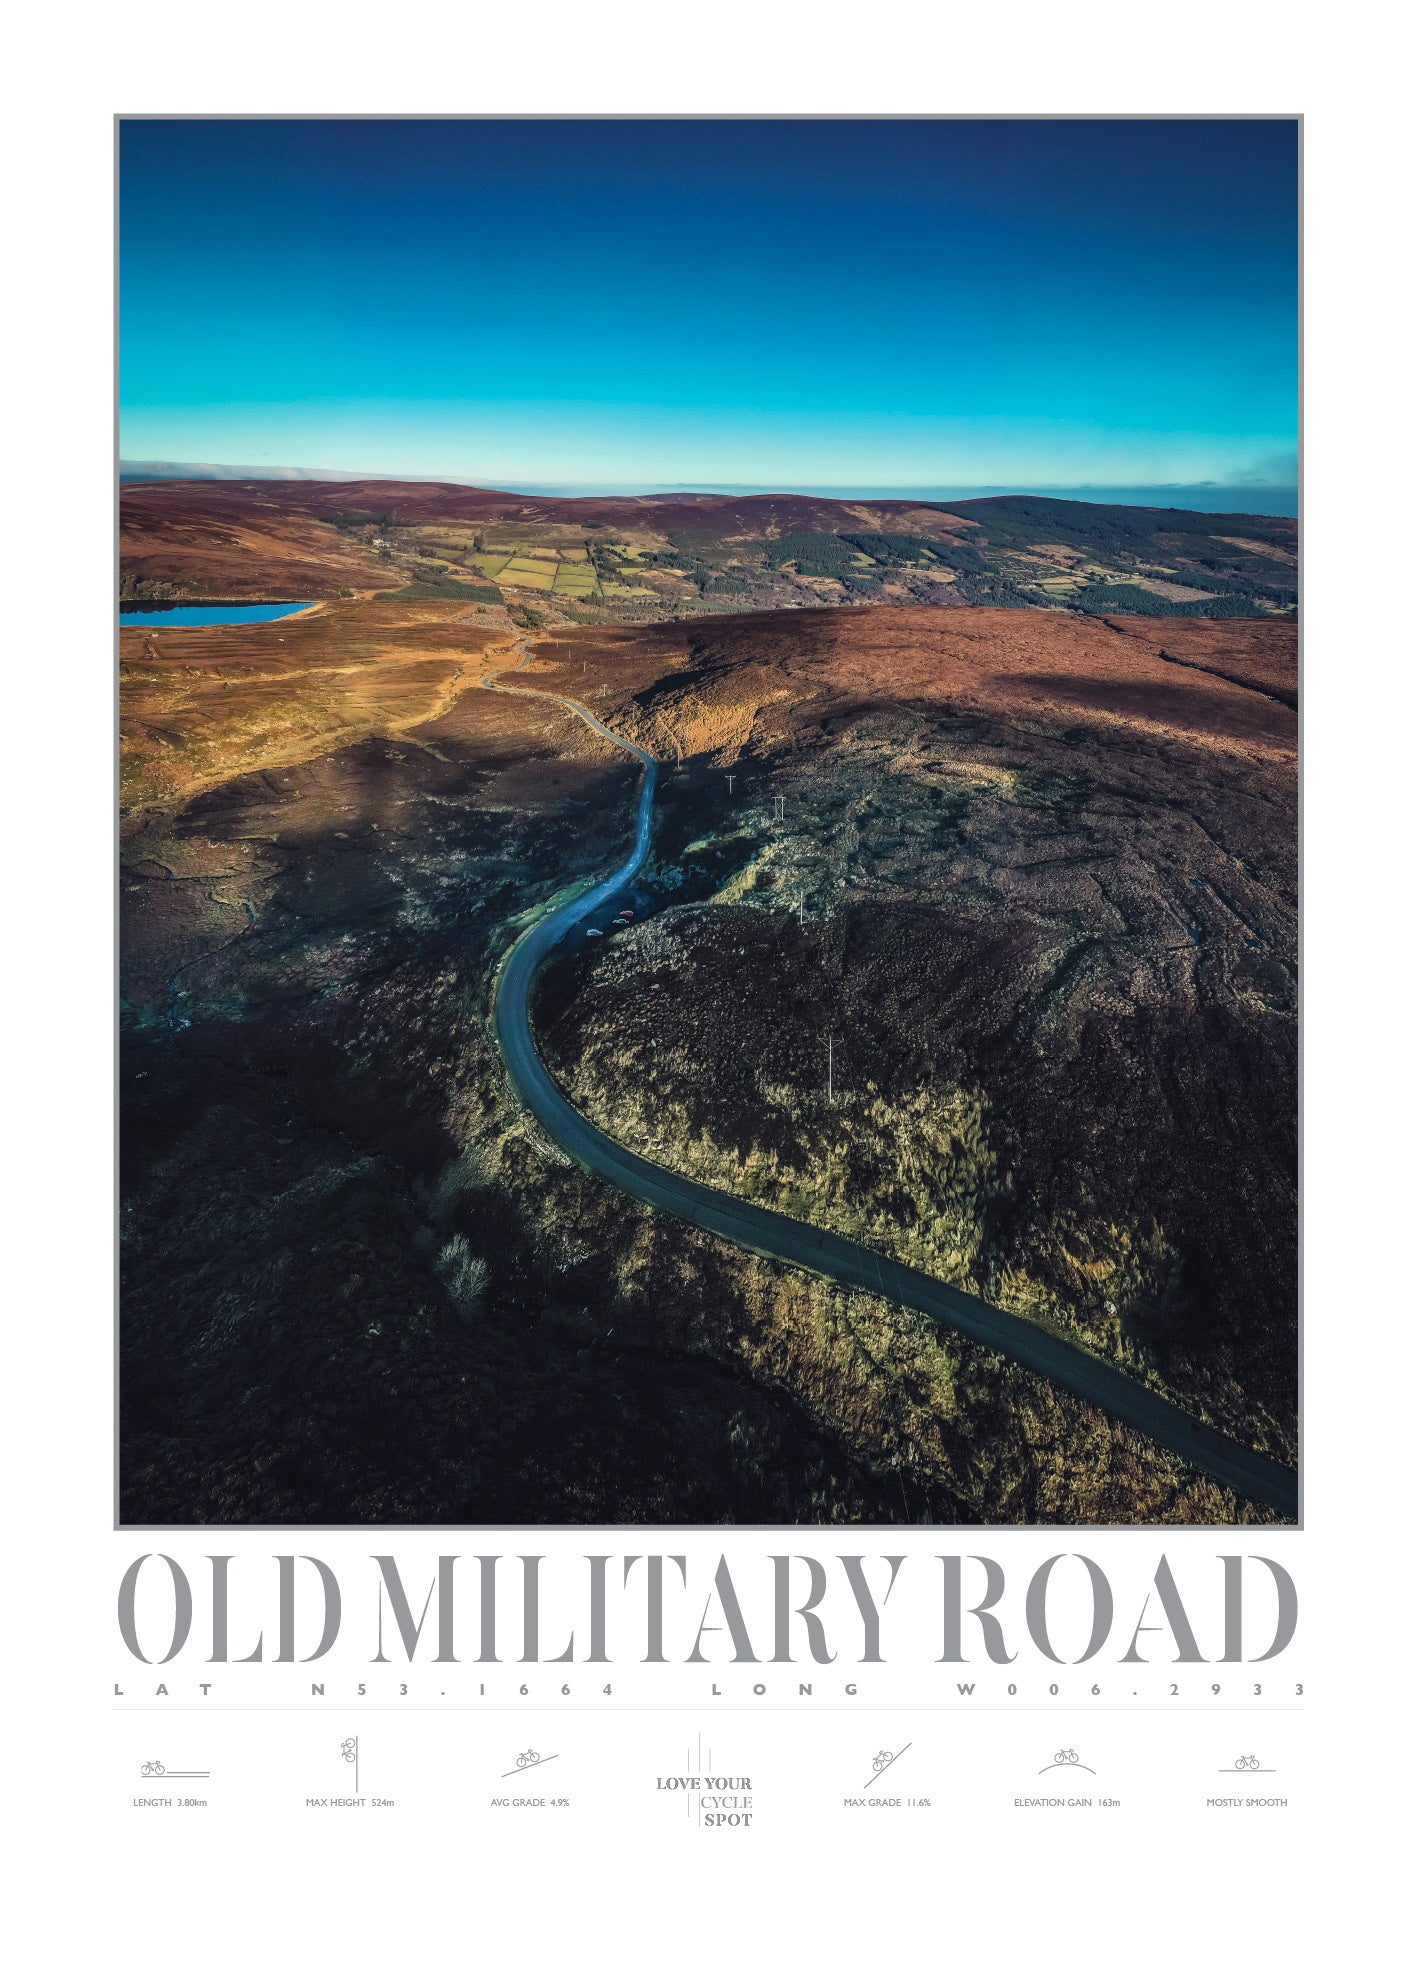 OLD MILITARY ROAD CO DUBLIN